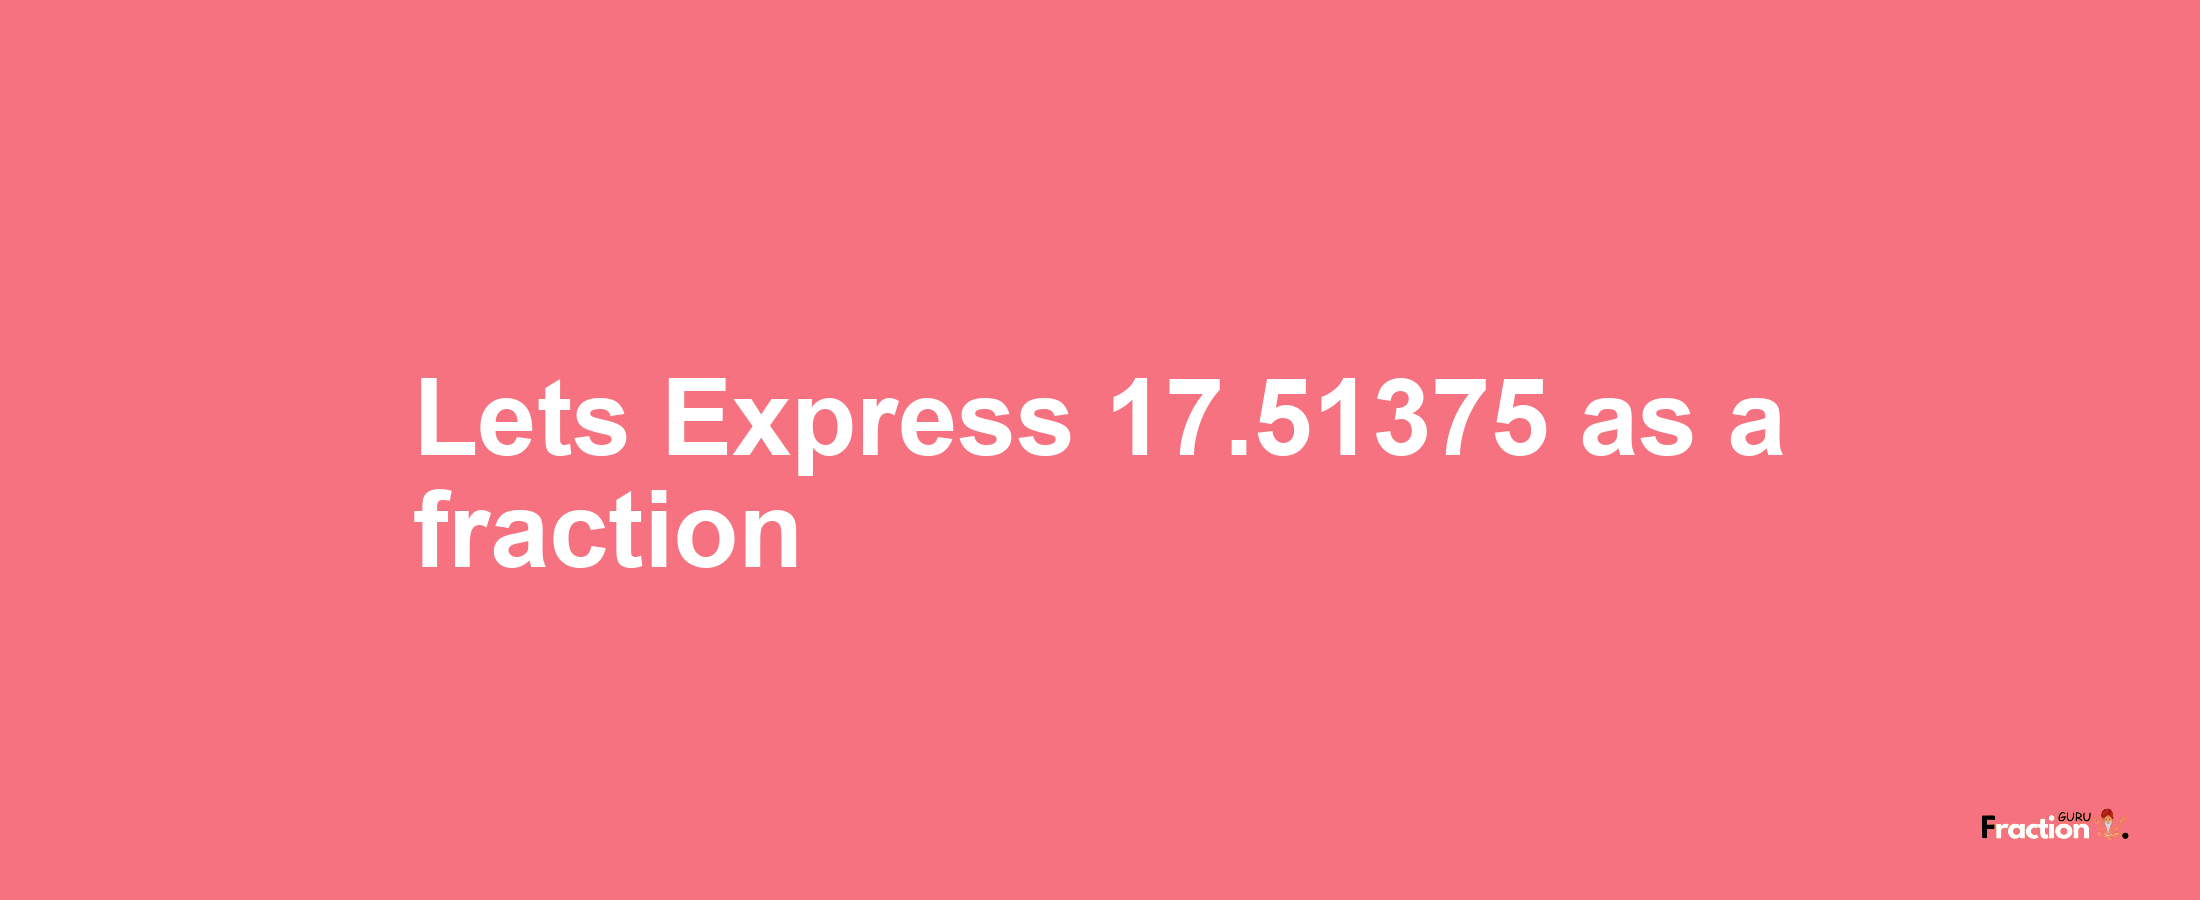 Lets Express 17.51375 as afraction